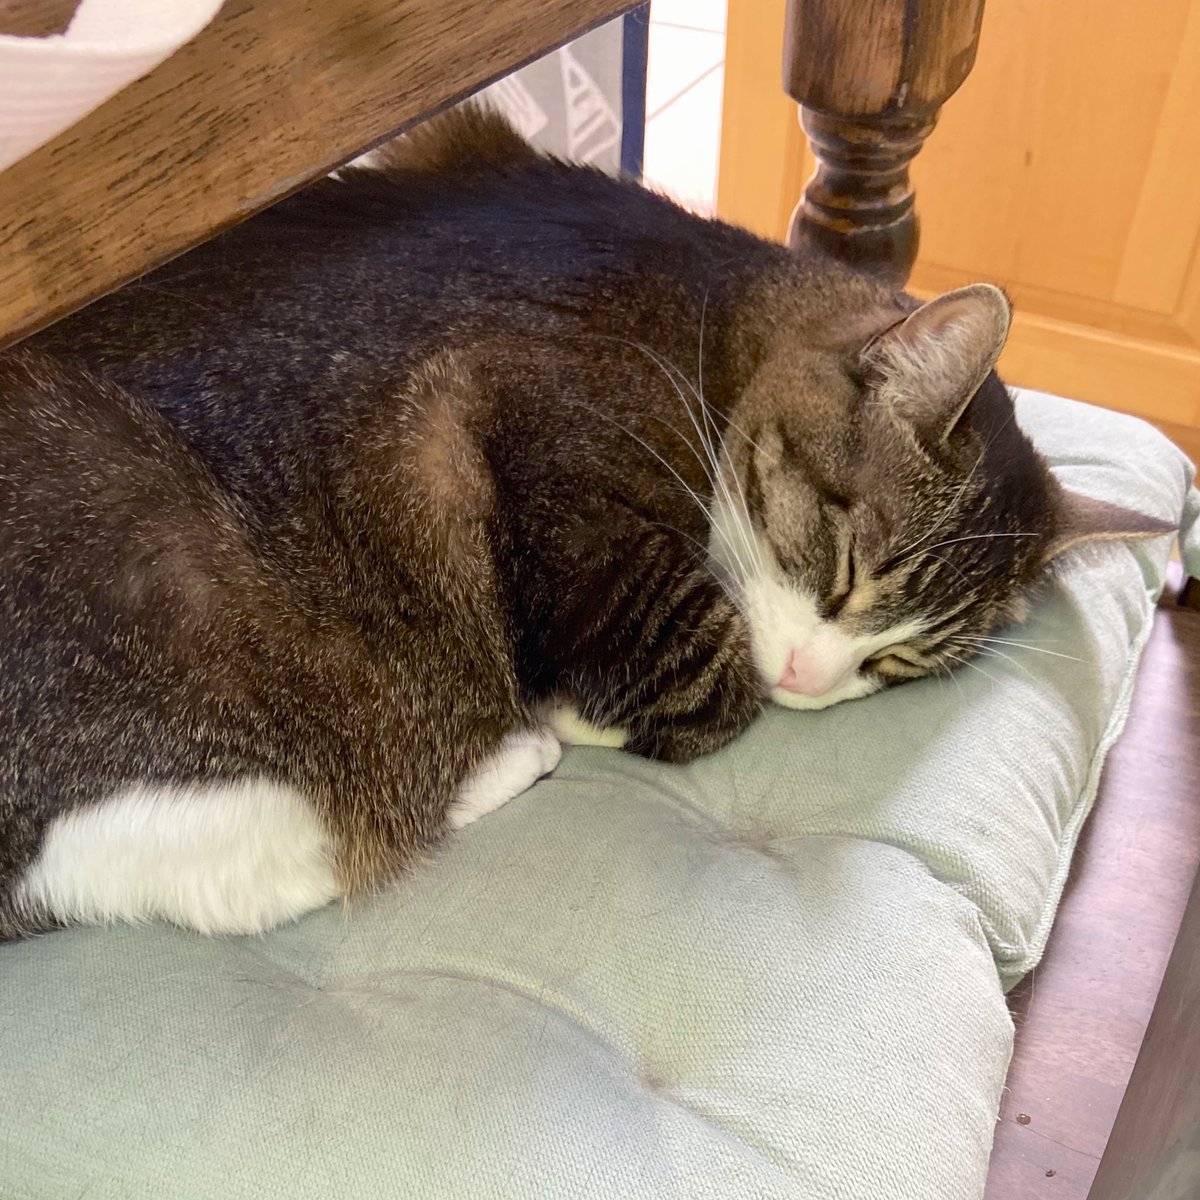 coke is asleep on a chair cushion, with her legs tucked under her and her h...